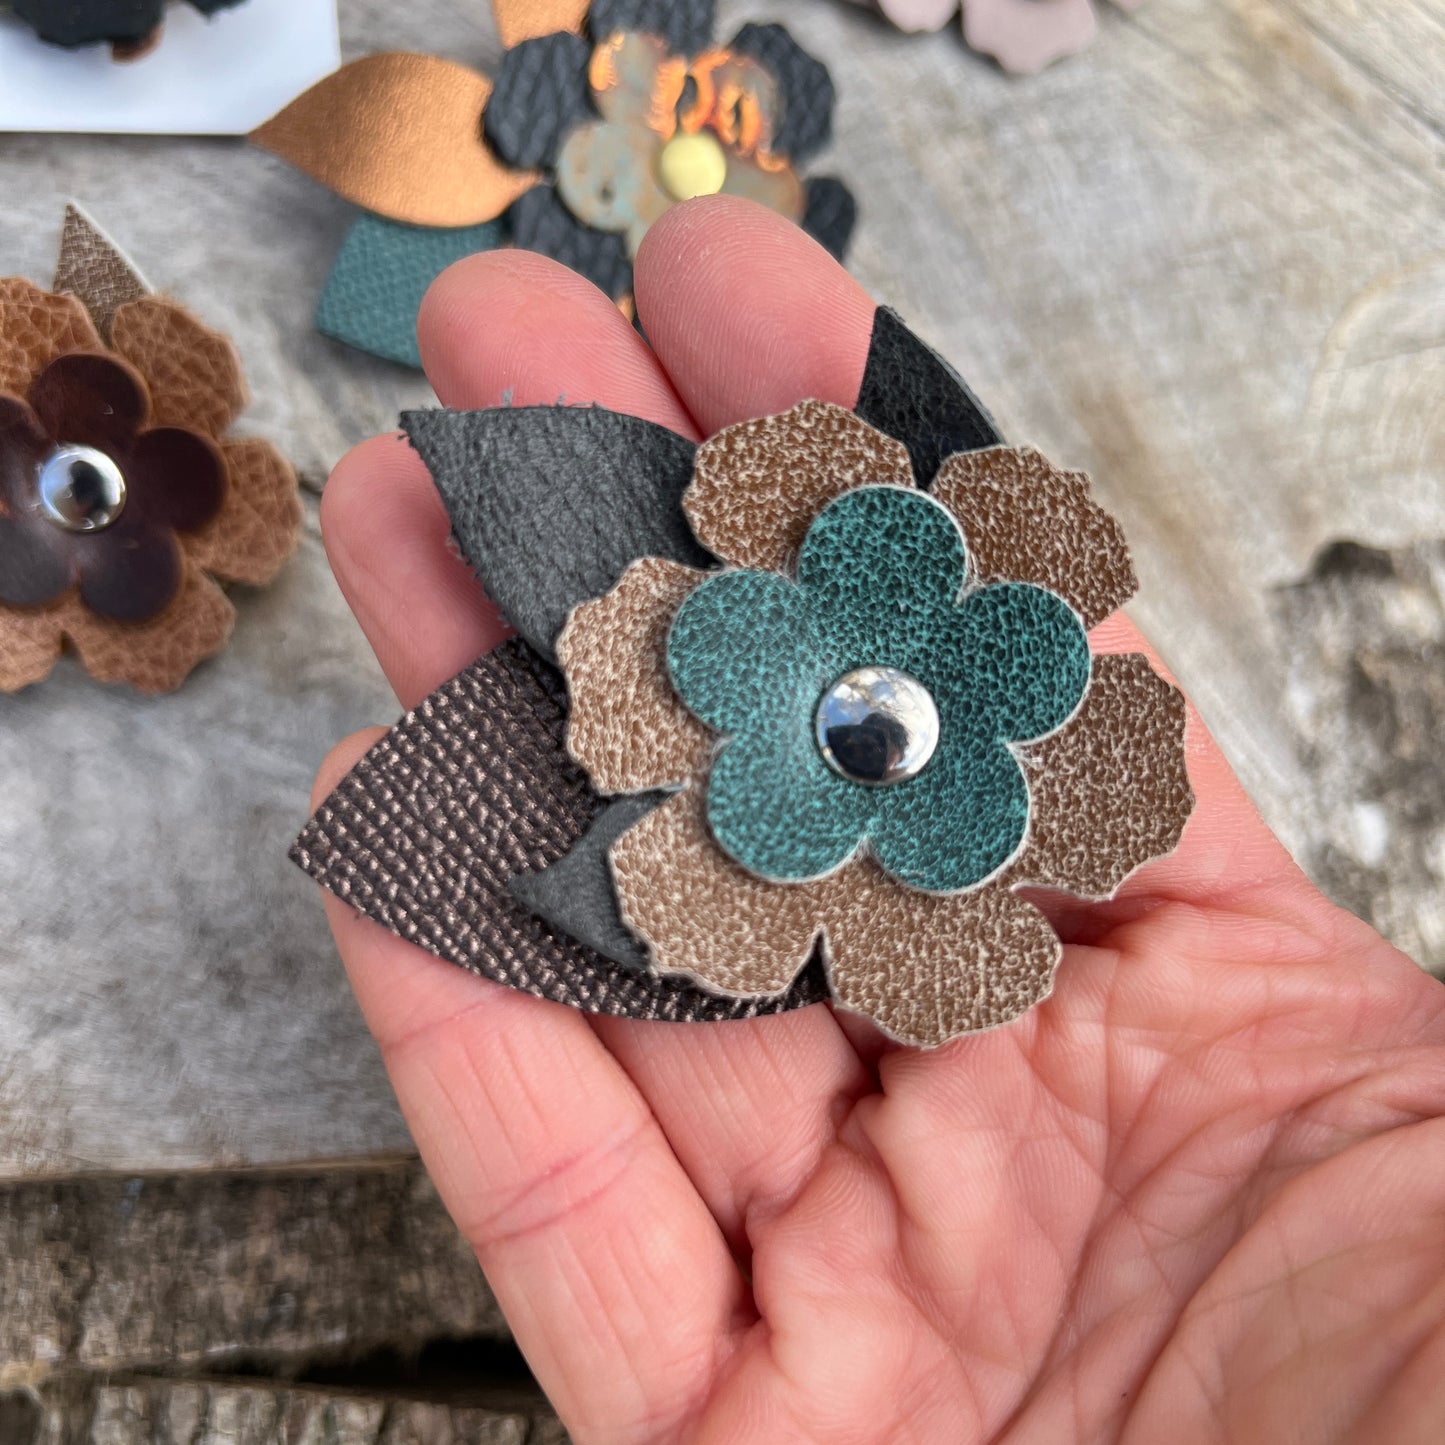 Small Leather Flower Pin Brooch - Neutral and Earthy